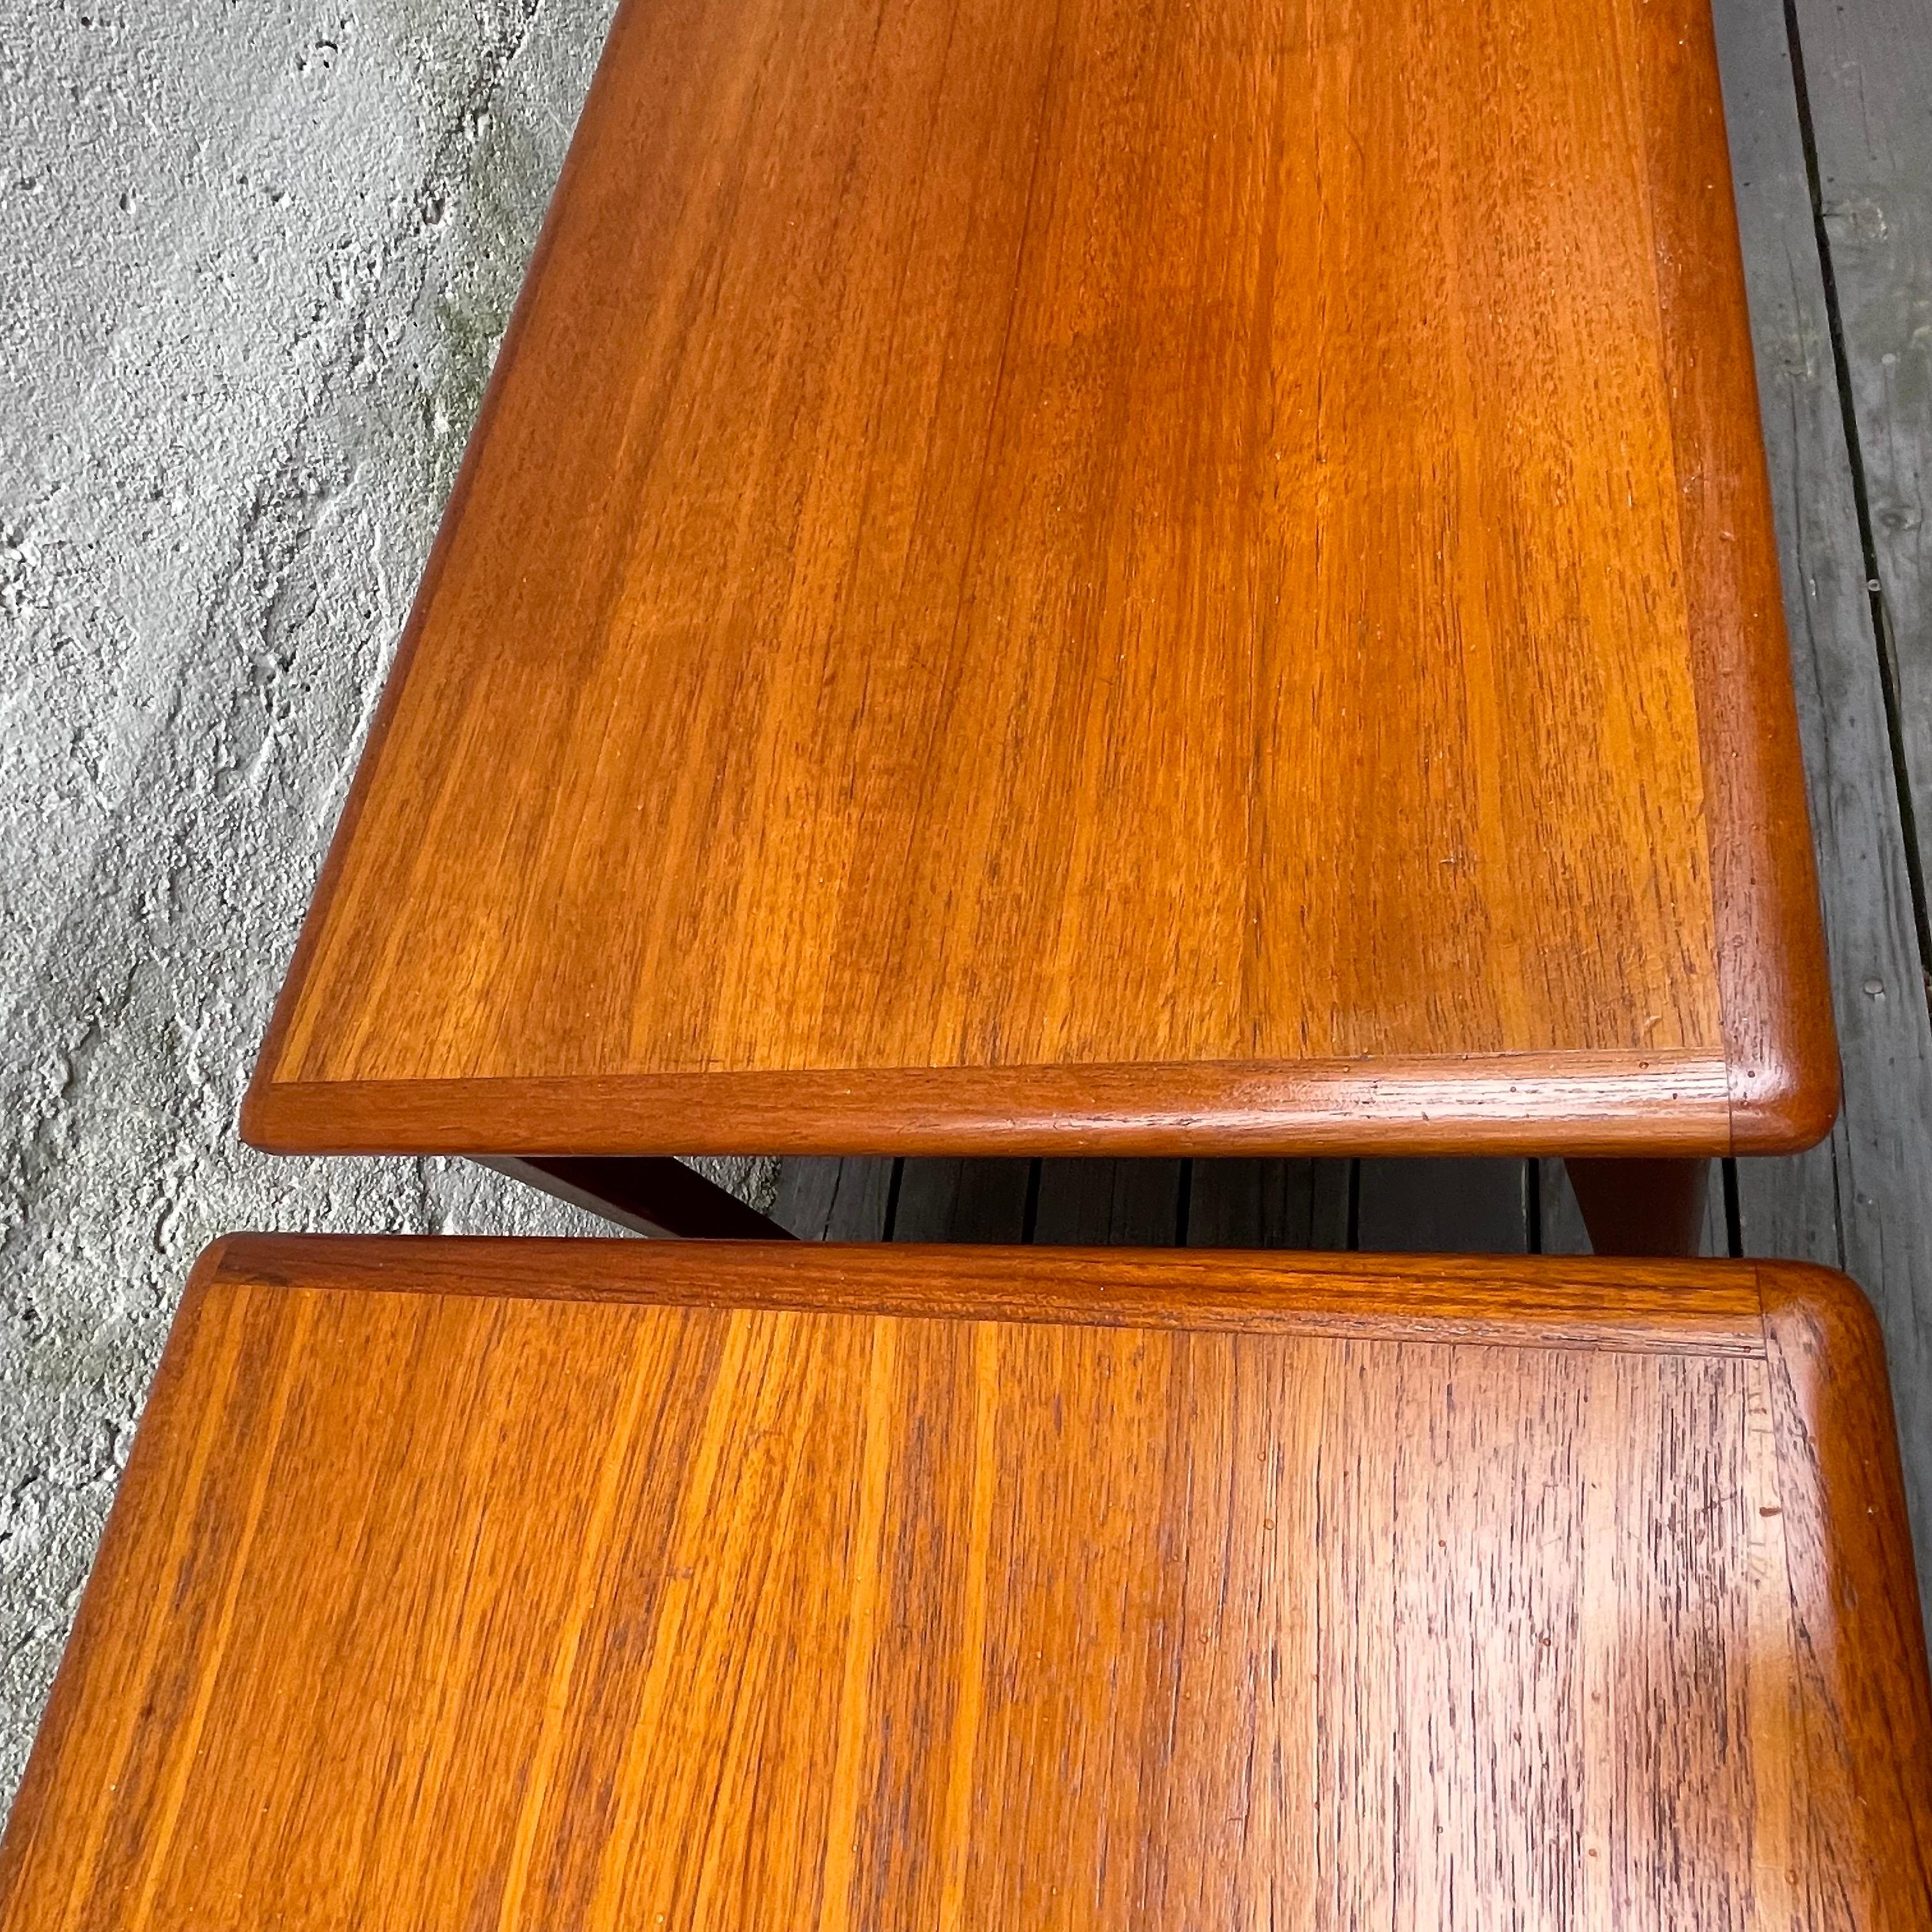 Pair of Mid-Century Modern Teak Side Tables or End Tables, Denmark, 1960's For Sale 3